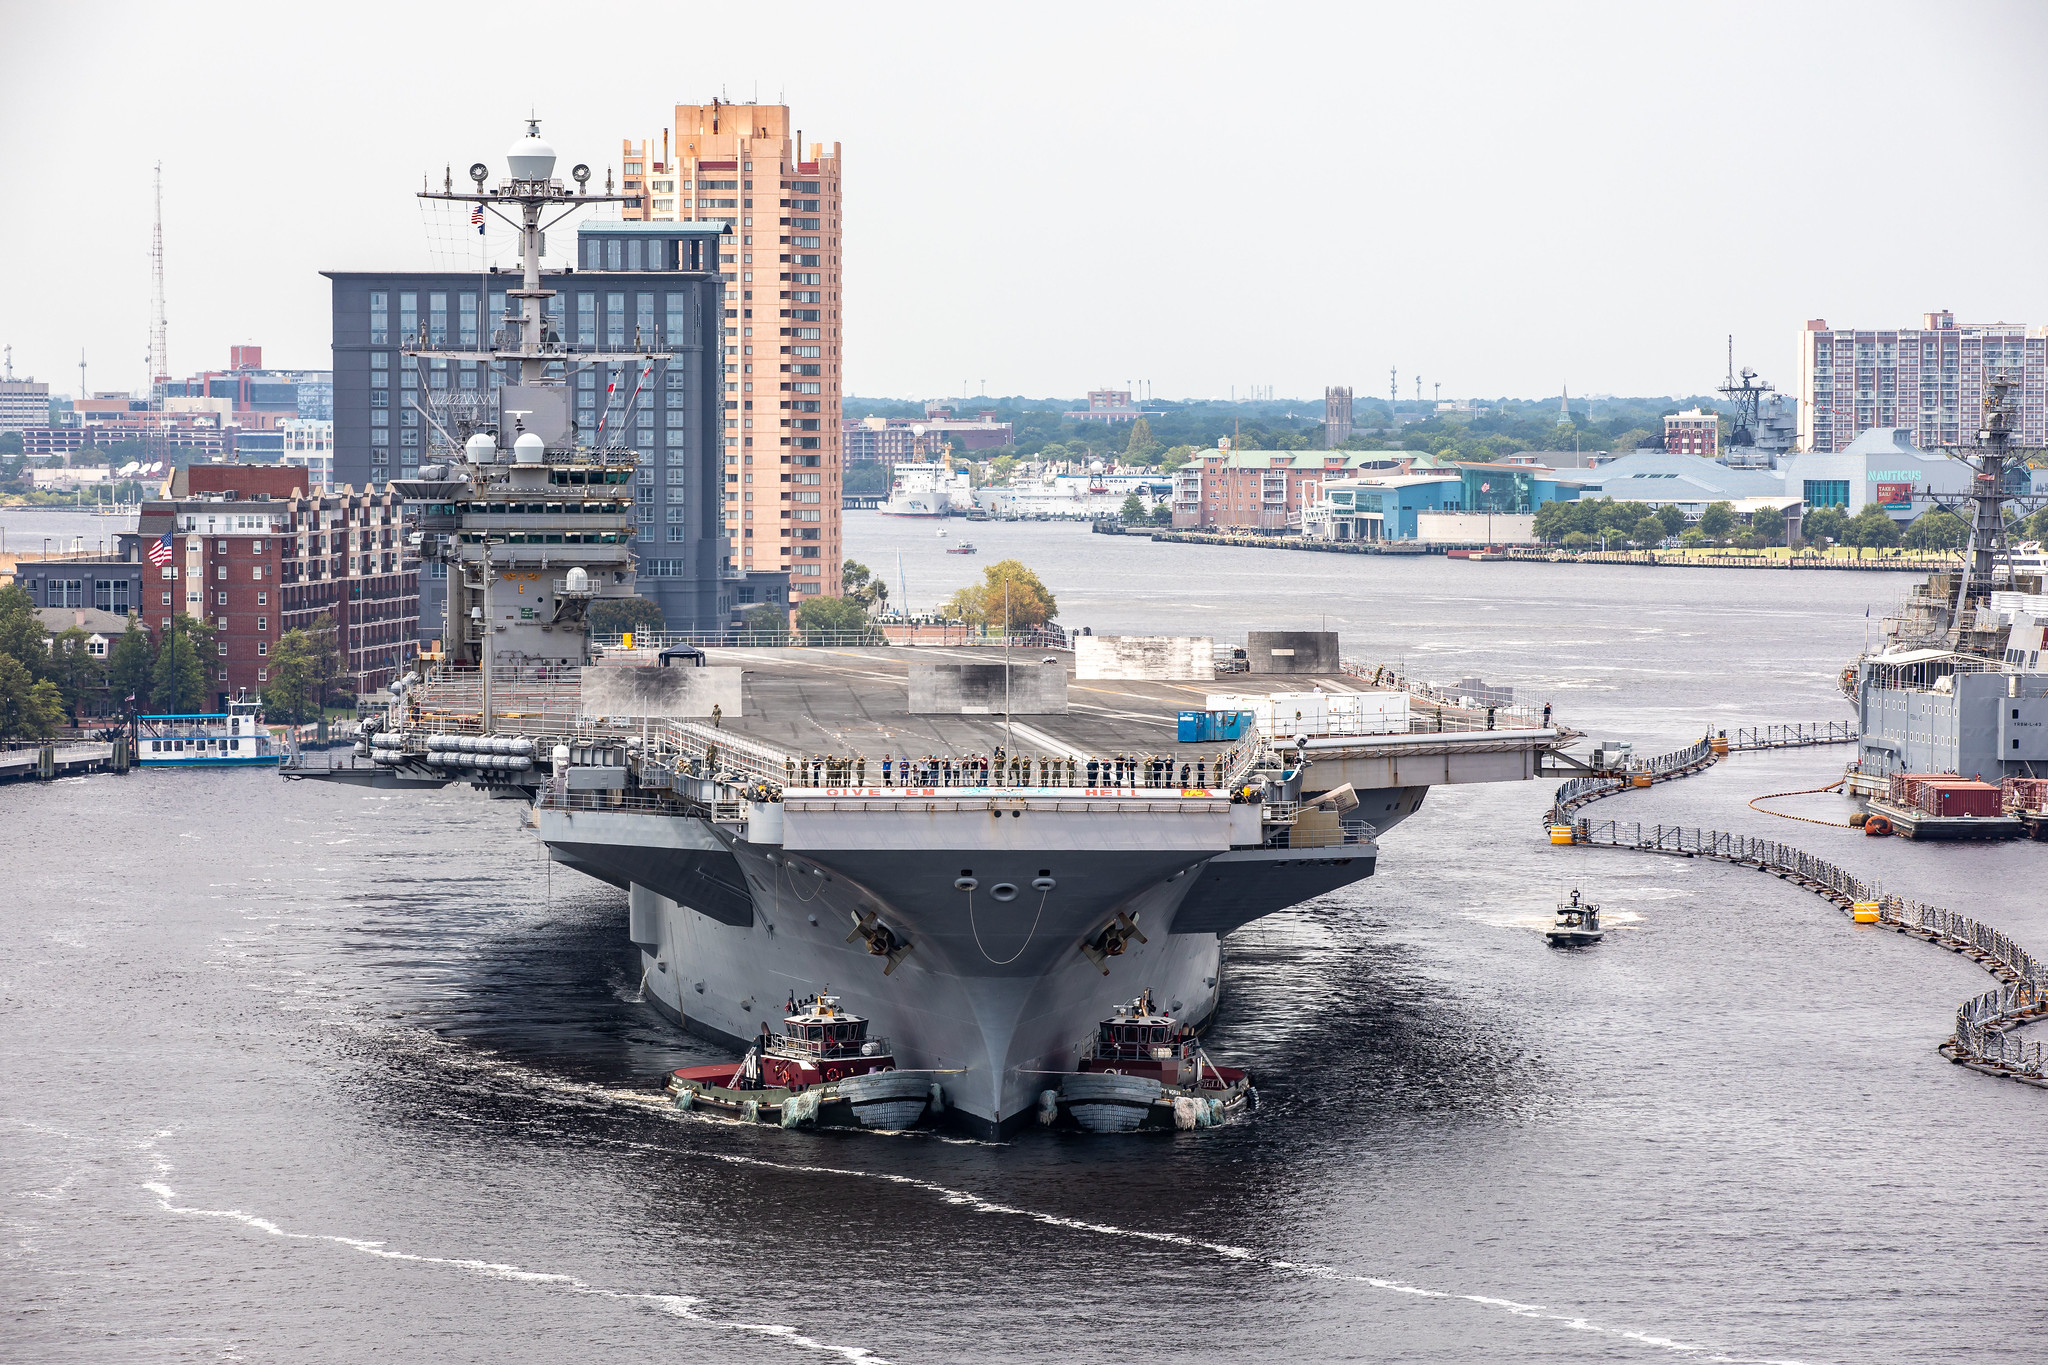 The aircraft carrier USS Harry S. Truman (CVN 75) arrives at Norfolk Naval Shipyard, July 7, 2020, for an extended carrier incremental availability. (U.S. Navy photo by Shelby West/Released) 200707-N-YO710-002. Image via Flickr.com, CC BY 2.0.